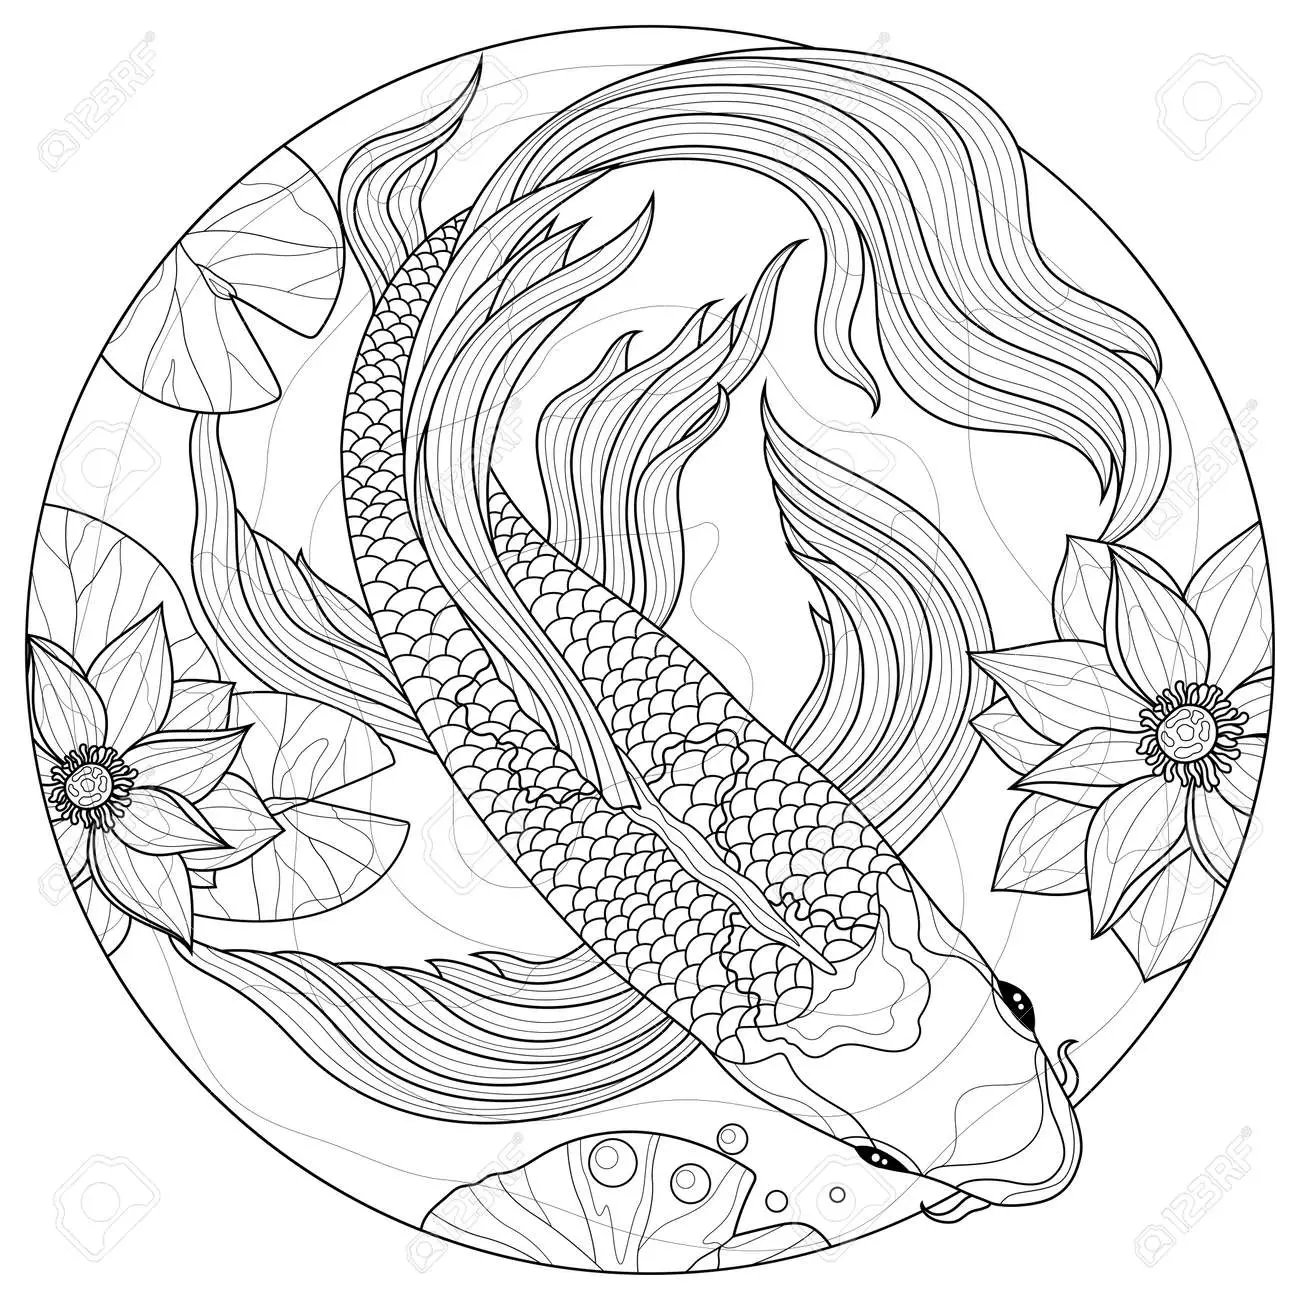 Koi Fish Coloring Pages 1